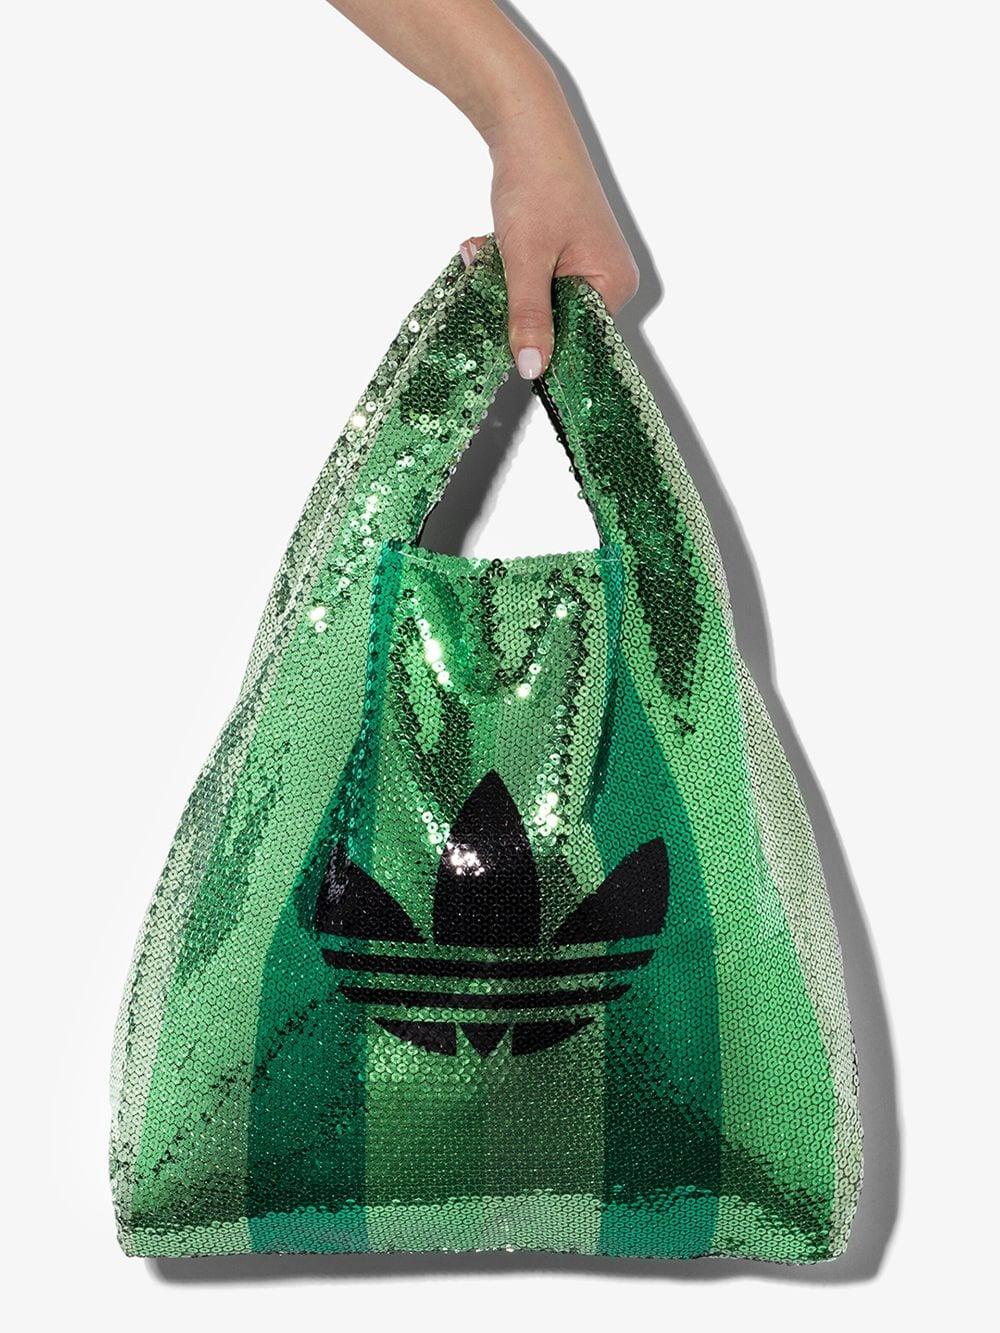 adidas X Anna Isoniemi Sequin Tote Bag in Green | Lyst